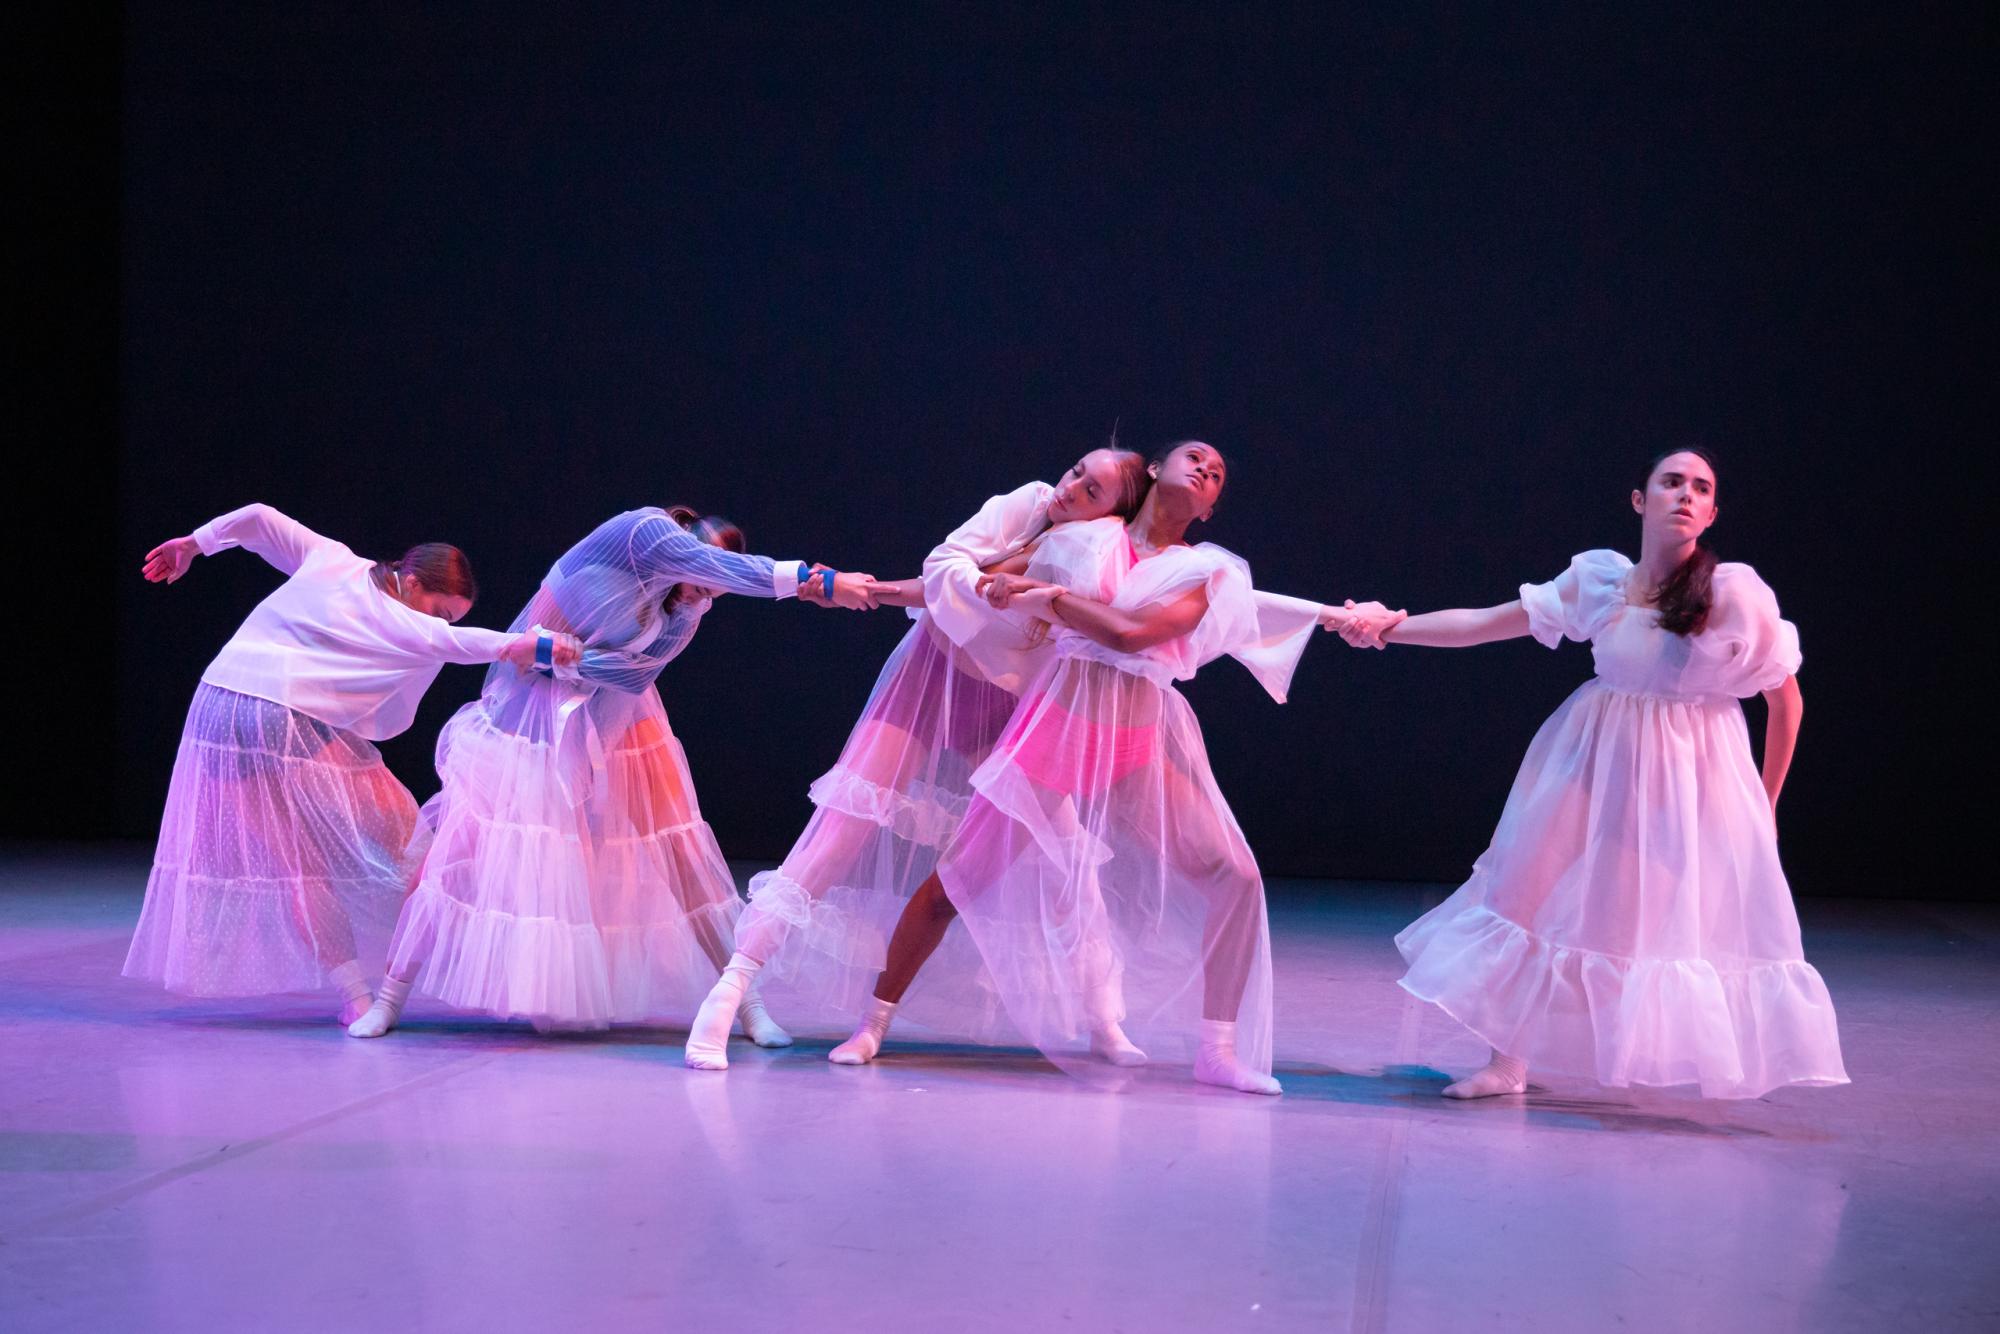 Dancers in white dresses hold hands together